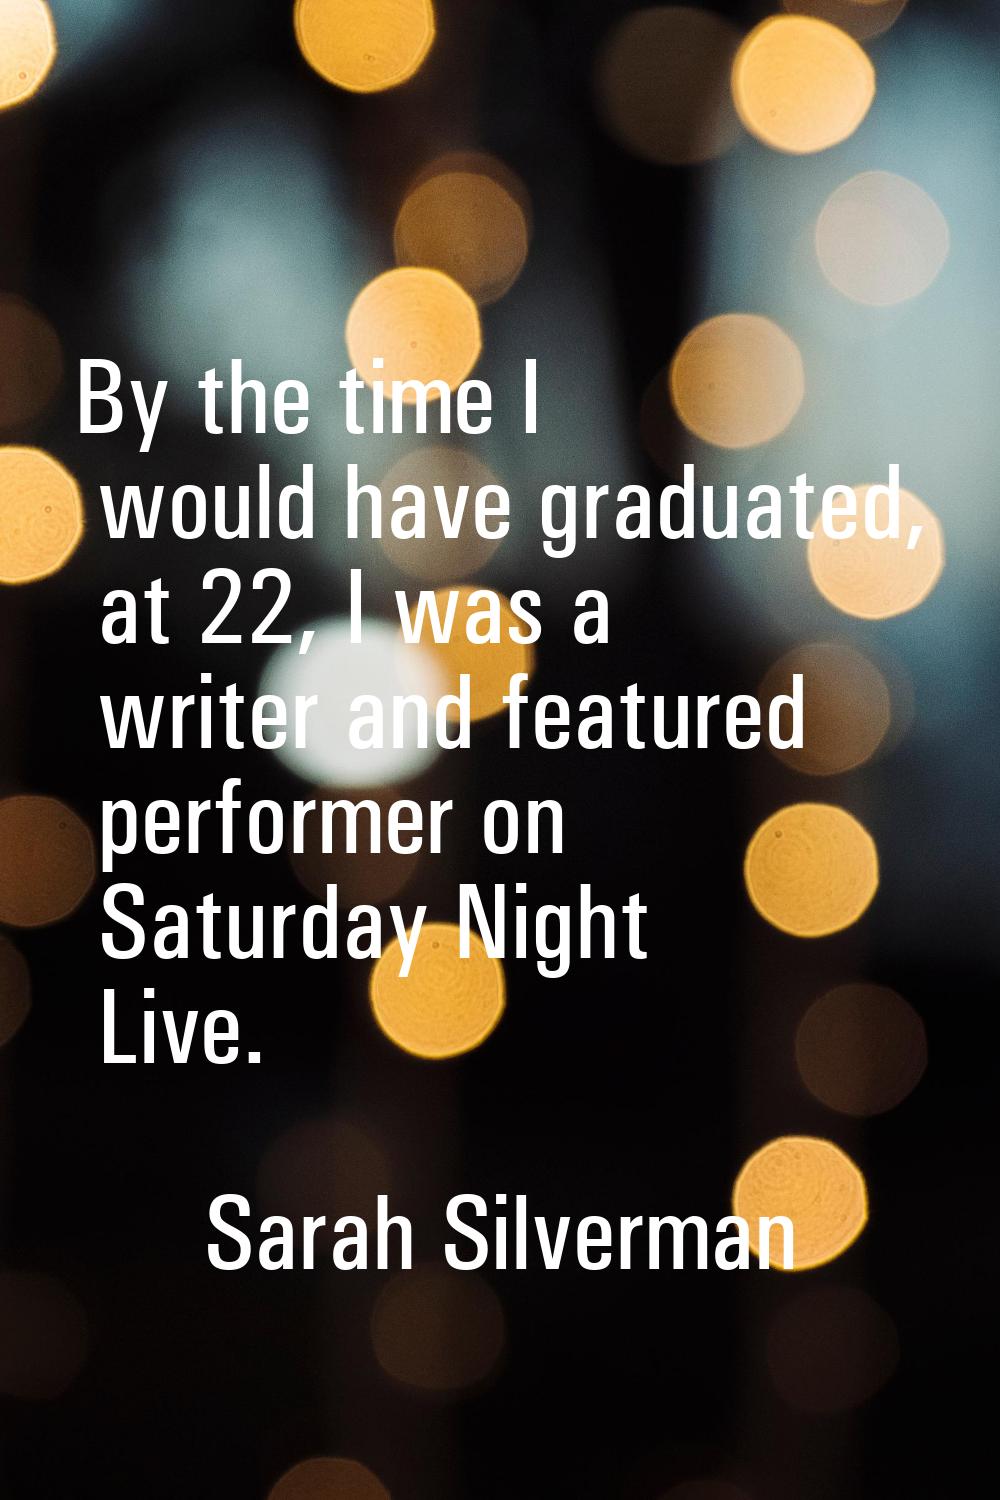 By the time I would have graduated, at 22, I was a writer and featured performer on Saturday Night 